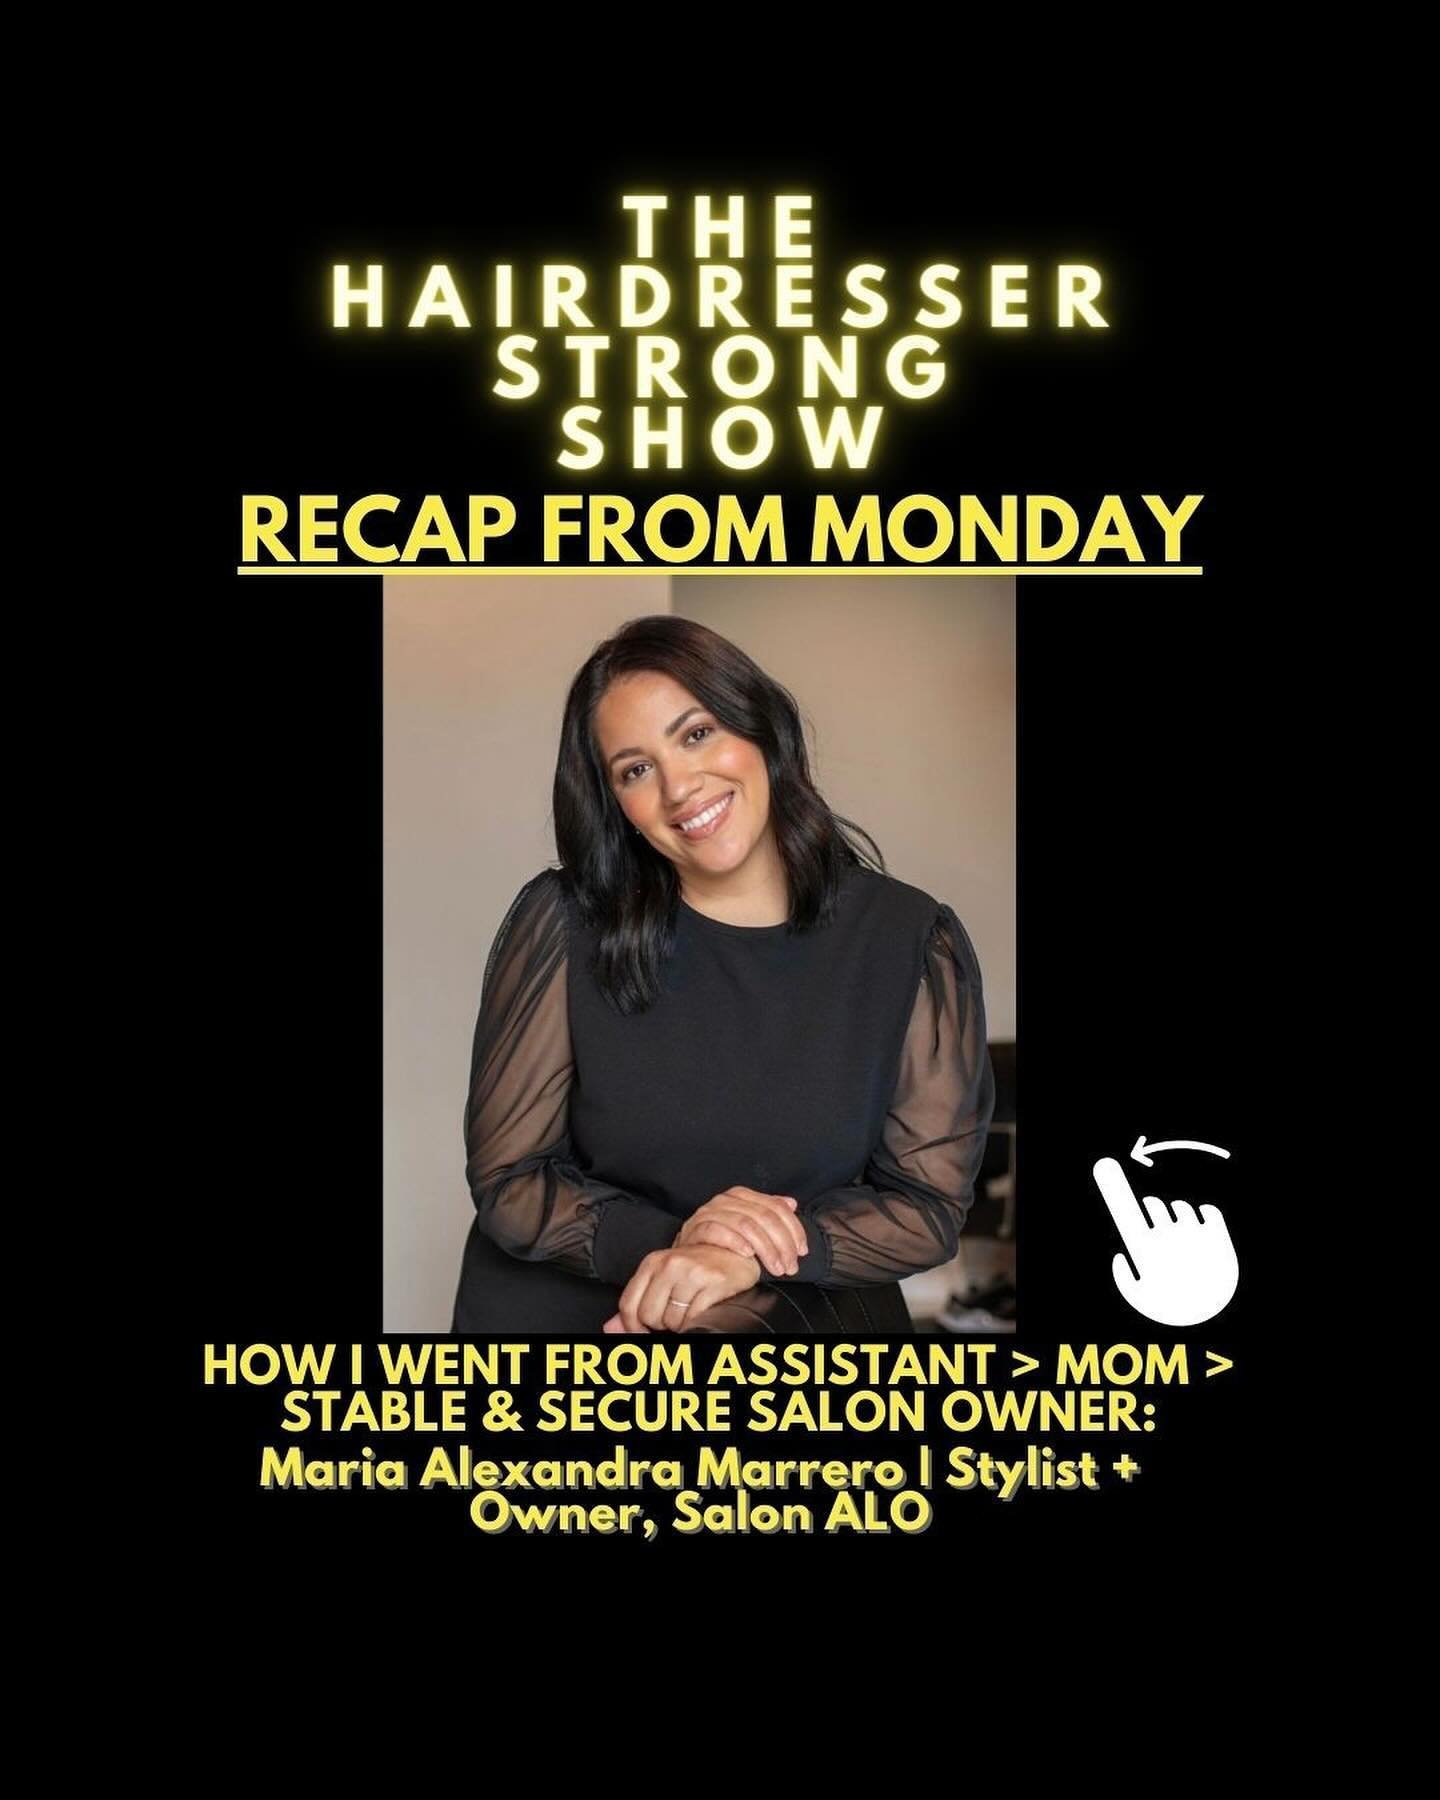 Monday, we heard how Maria (@mariaalexstyles) navigates and discovers balance with family, salon ownership, and seeks advice and education to realize her dreams with less stress than most.⁠
⁠
⚡Comment &ldquo;194&rdquo;⚡ to instantly receive the link 